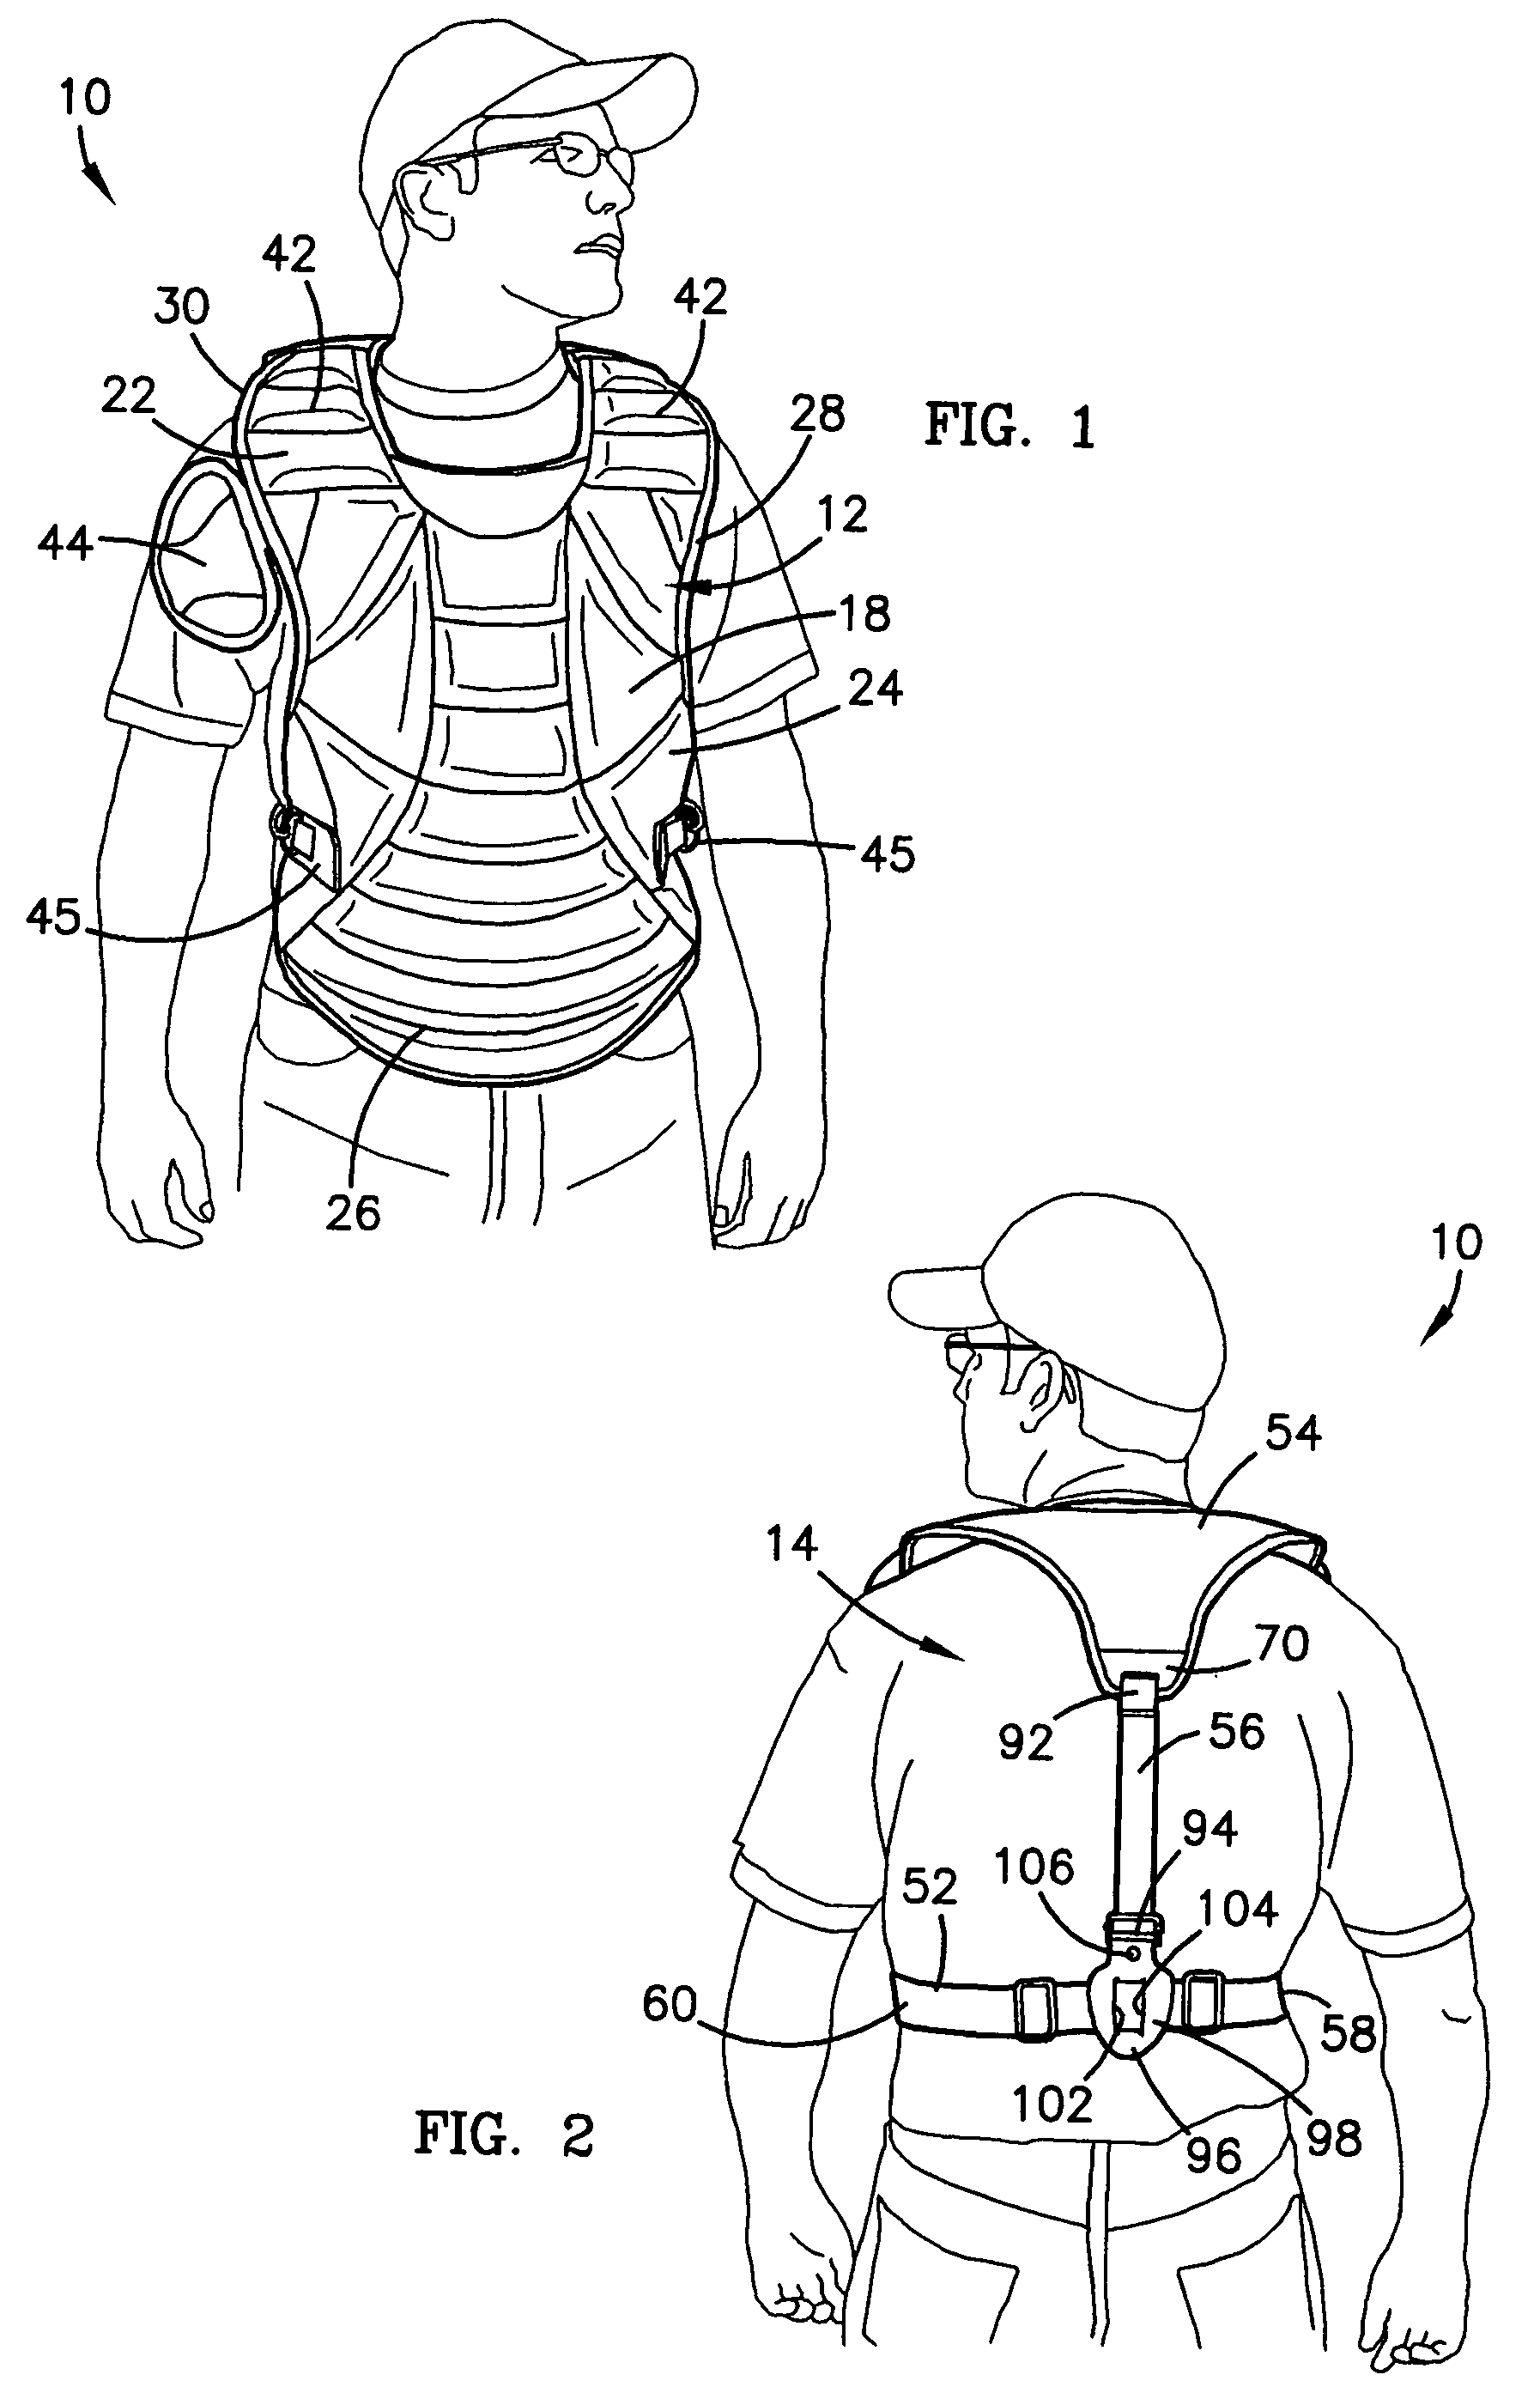 Catcher's chest protector